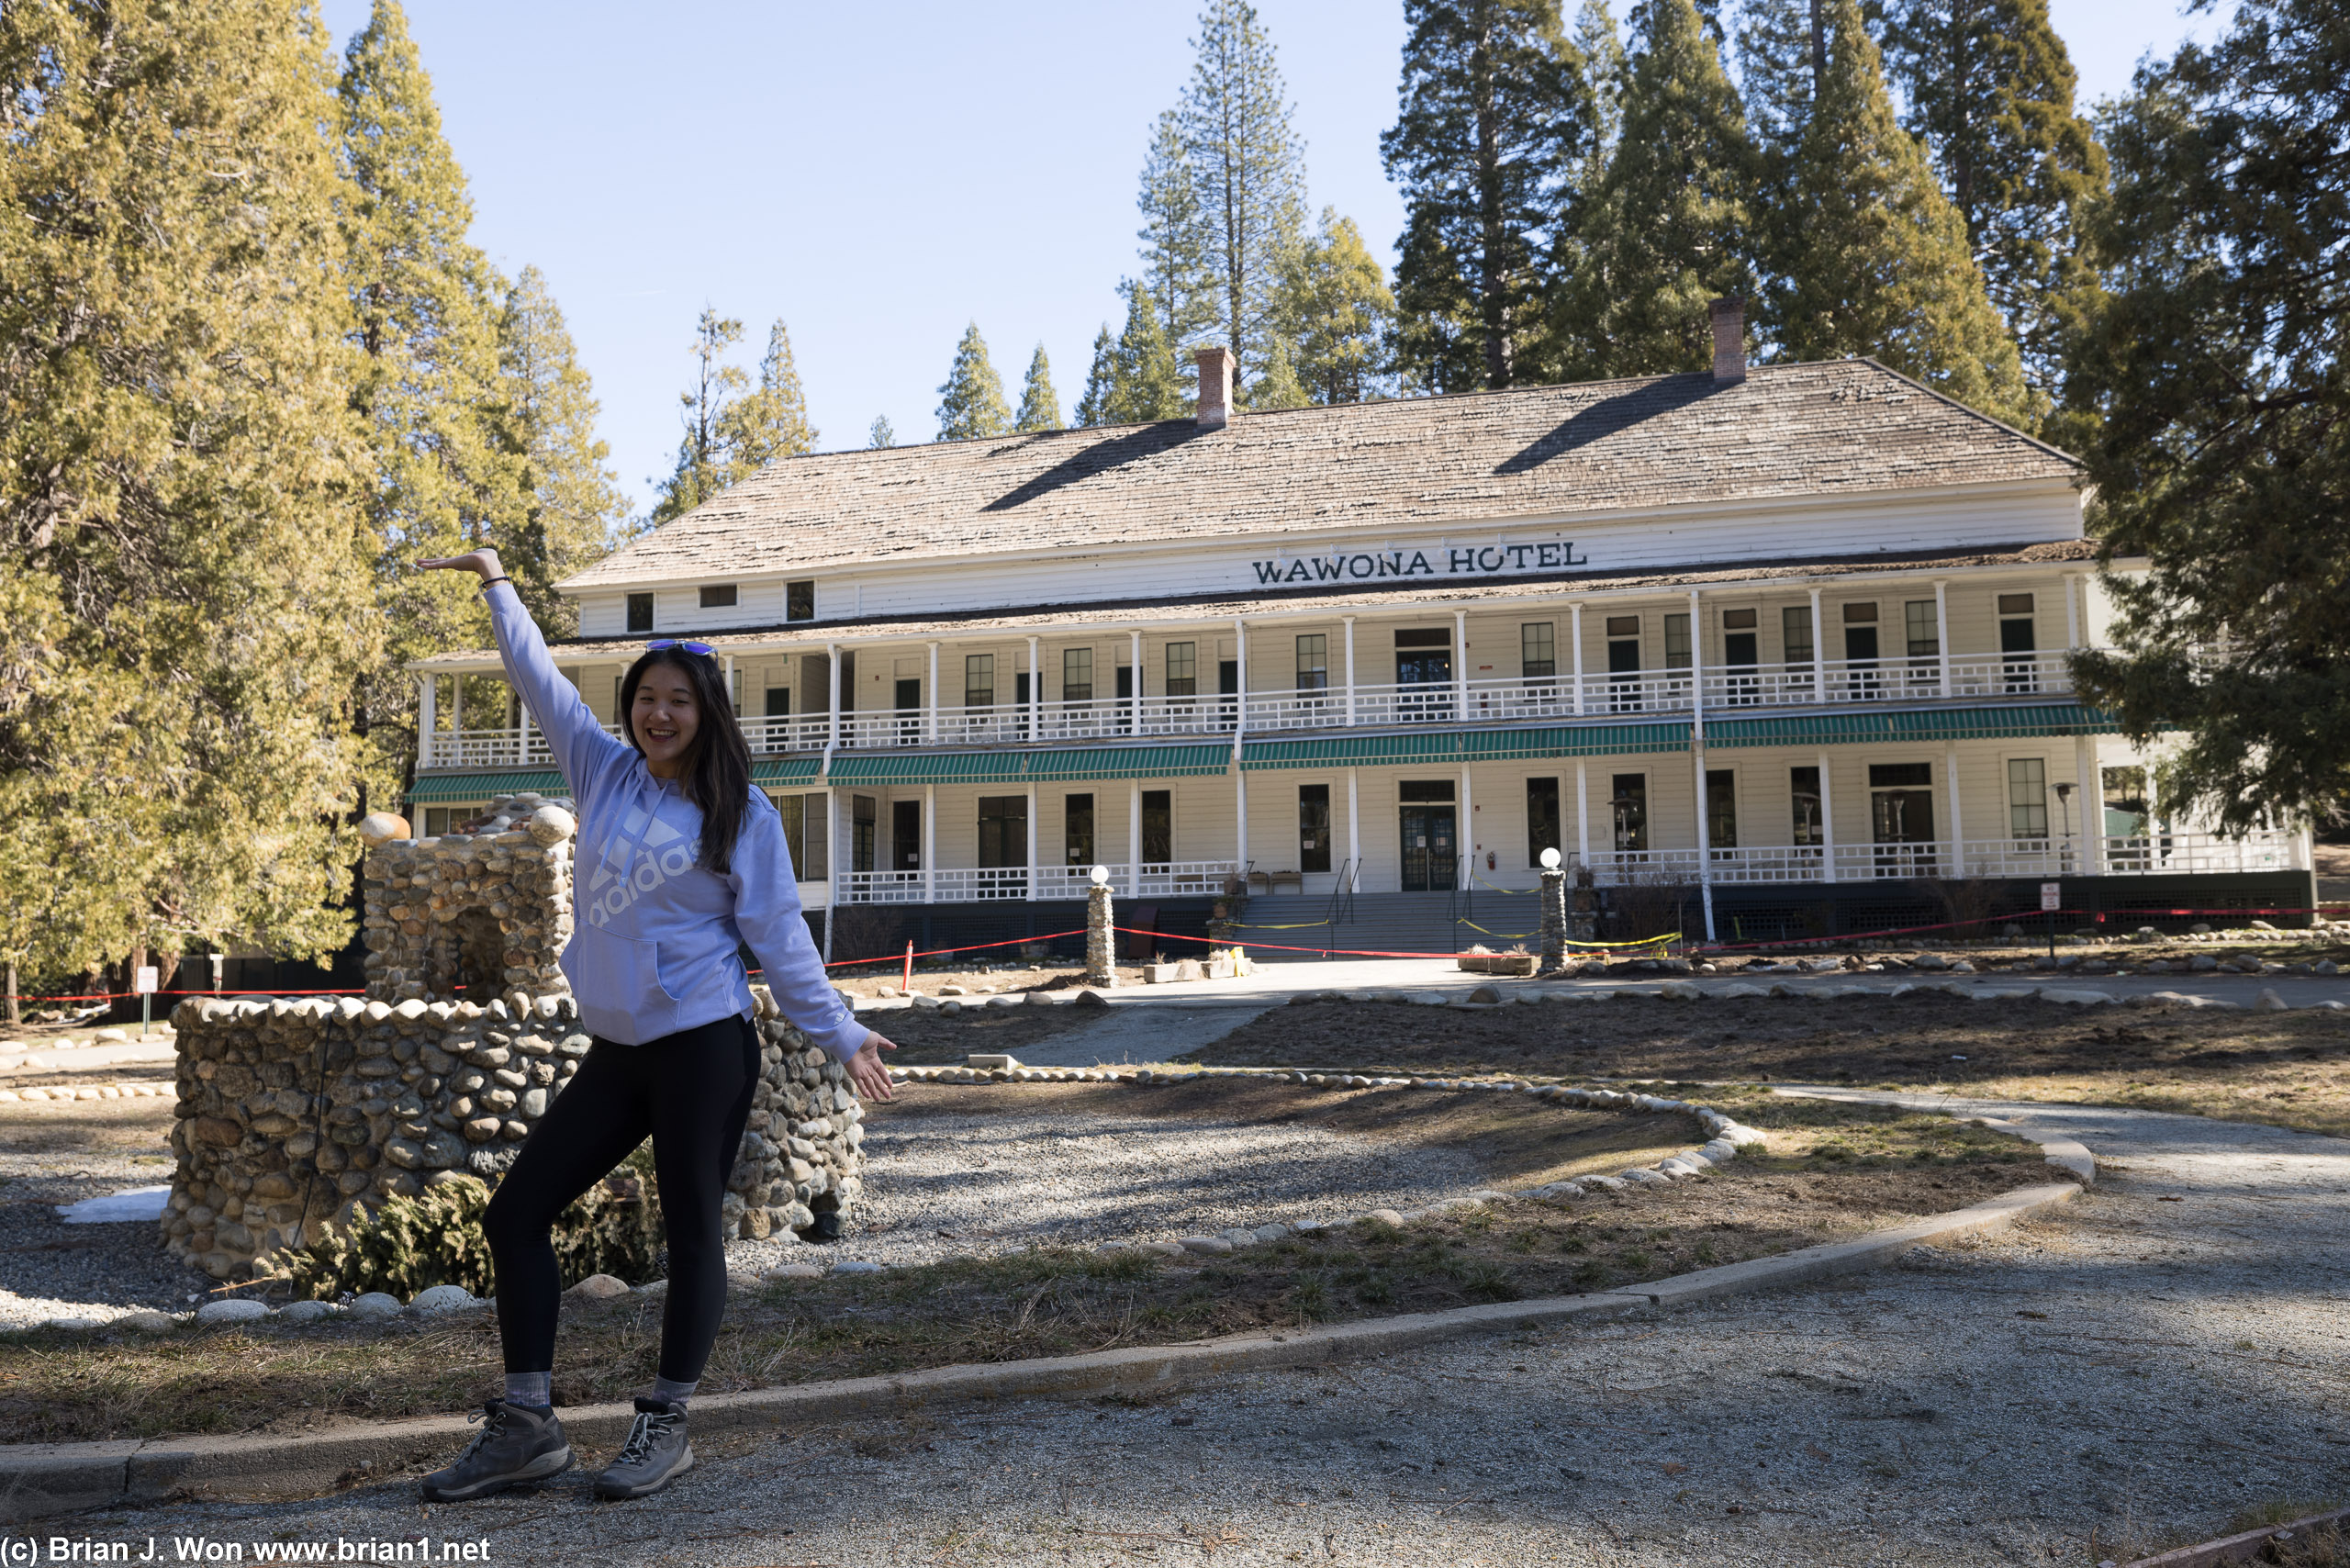 The famed (now closed) Wawona Hotel.